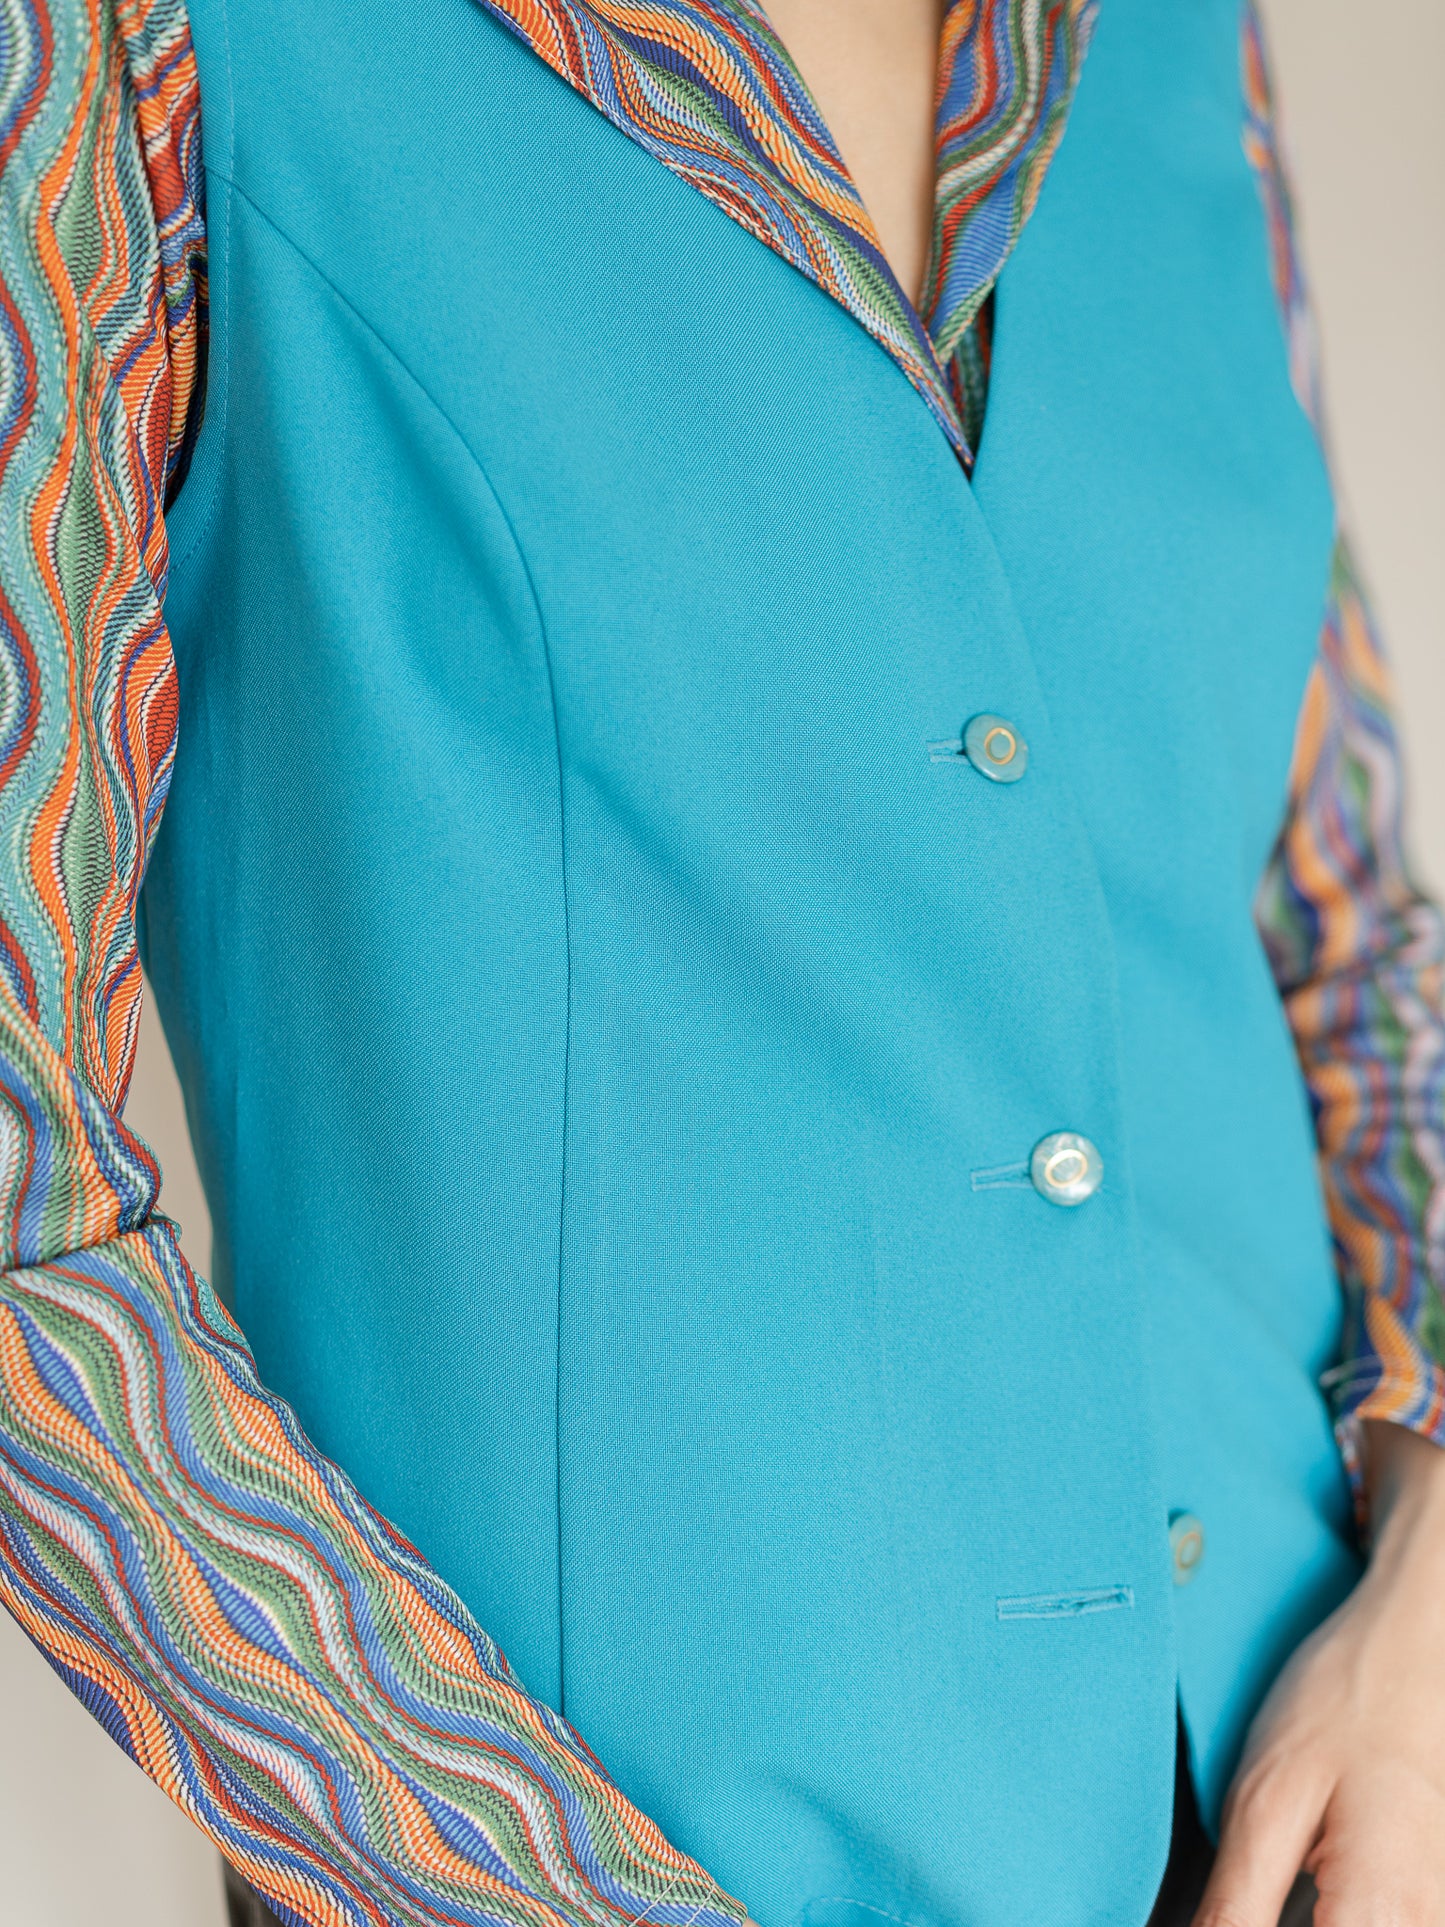 Vintage Handmade Turquoise Vest With A Back Tie (M)